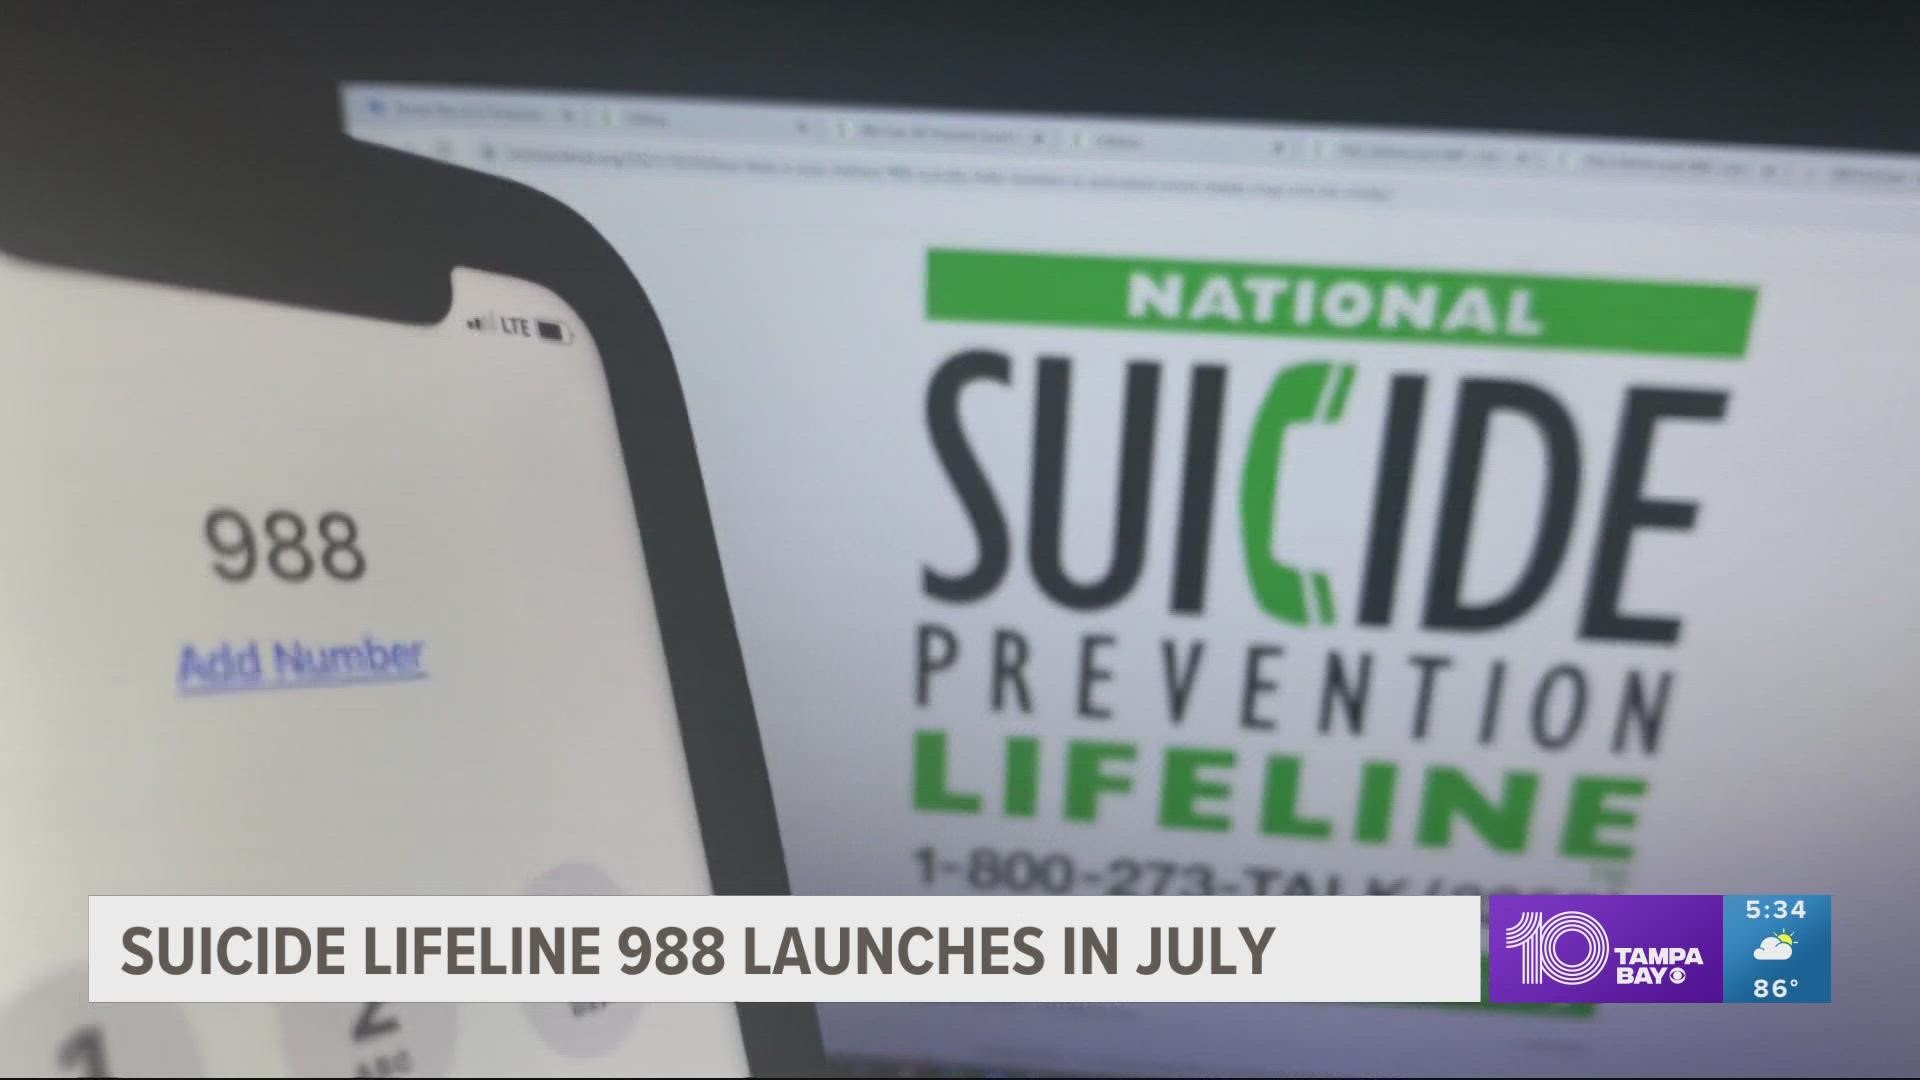 In July, a new national suicide prevention lifeline goes live. It's 988.